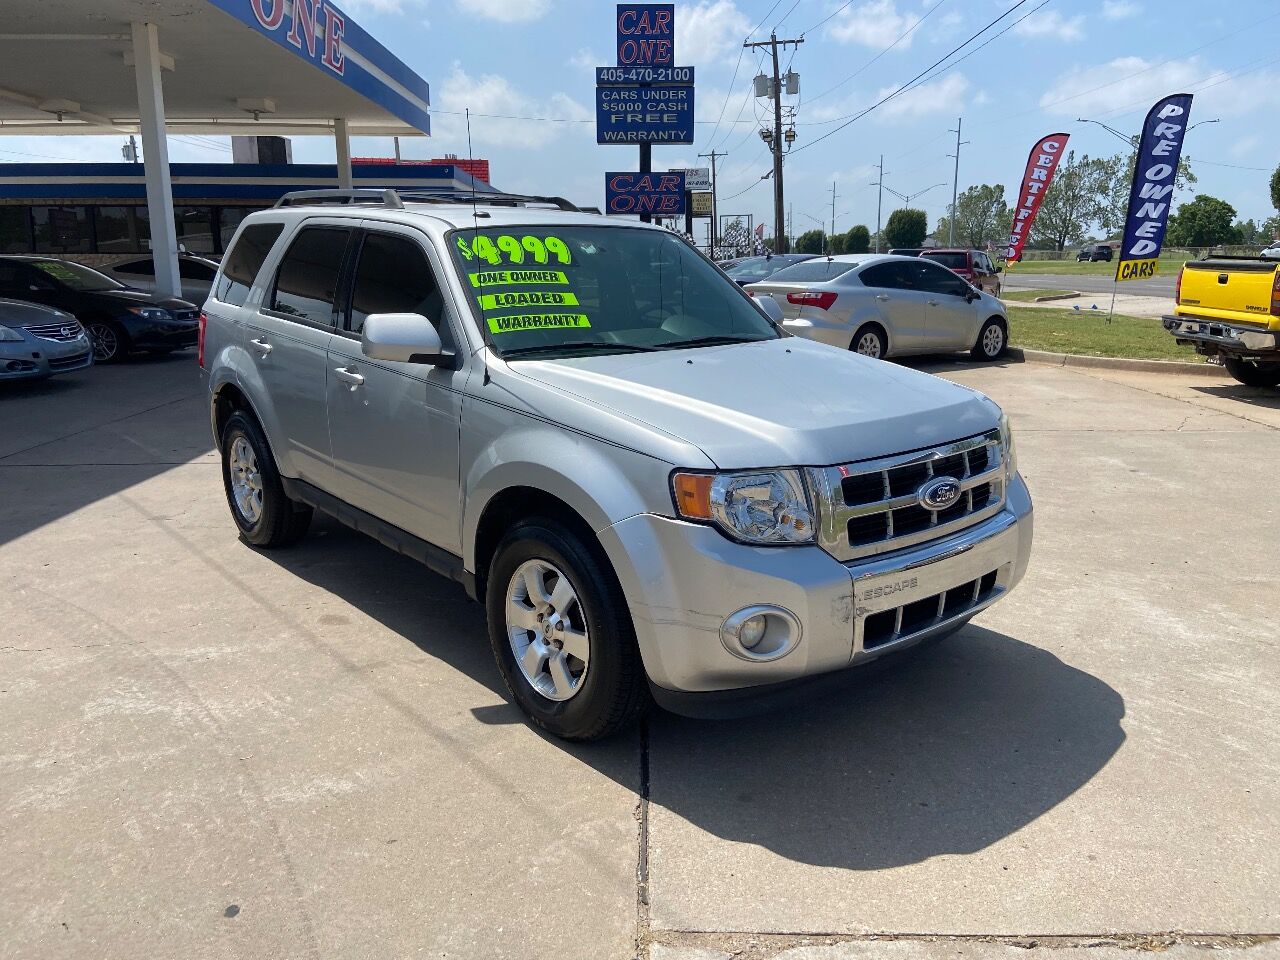 2011 Ford Escape Limited AWD